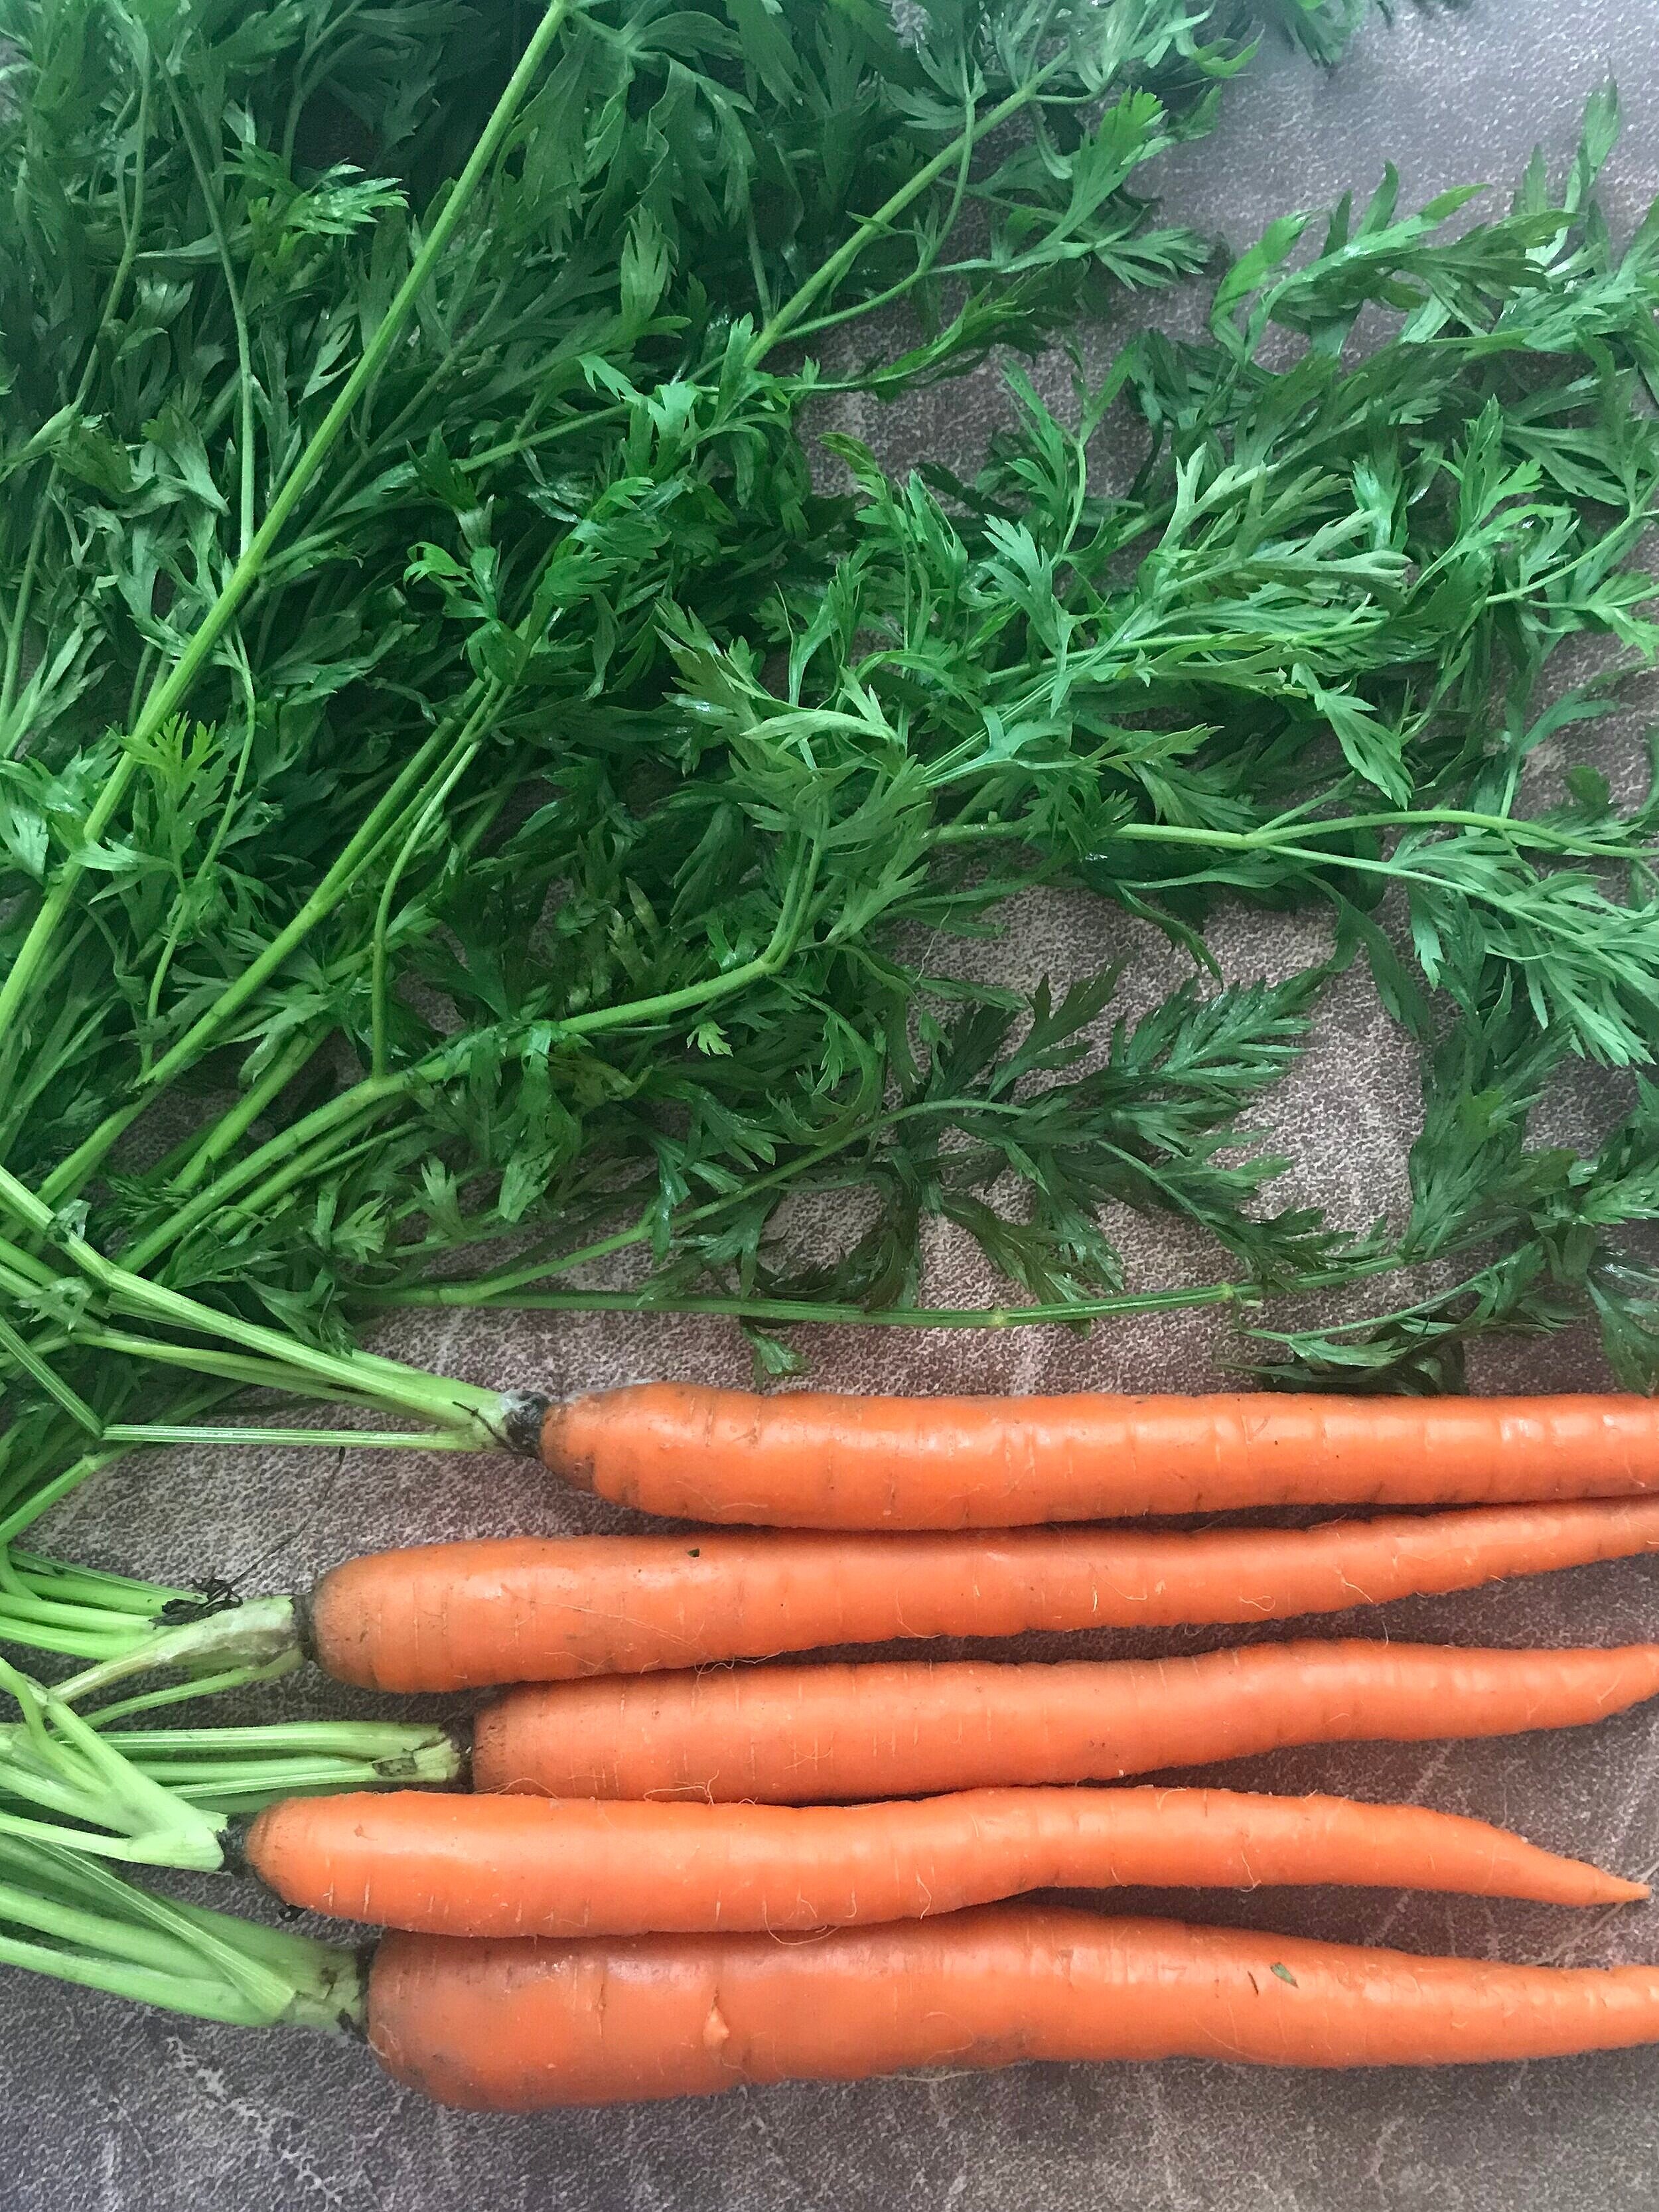 Episode 12 Carrots with tops.jpg